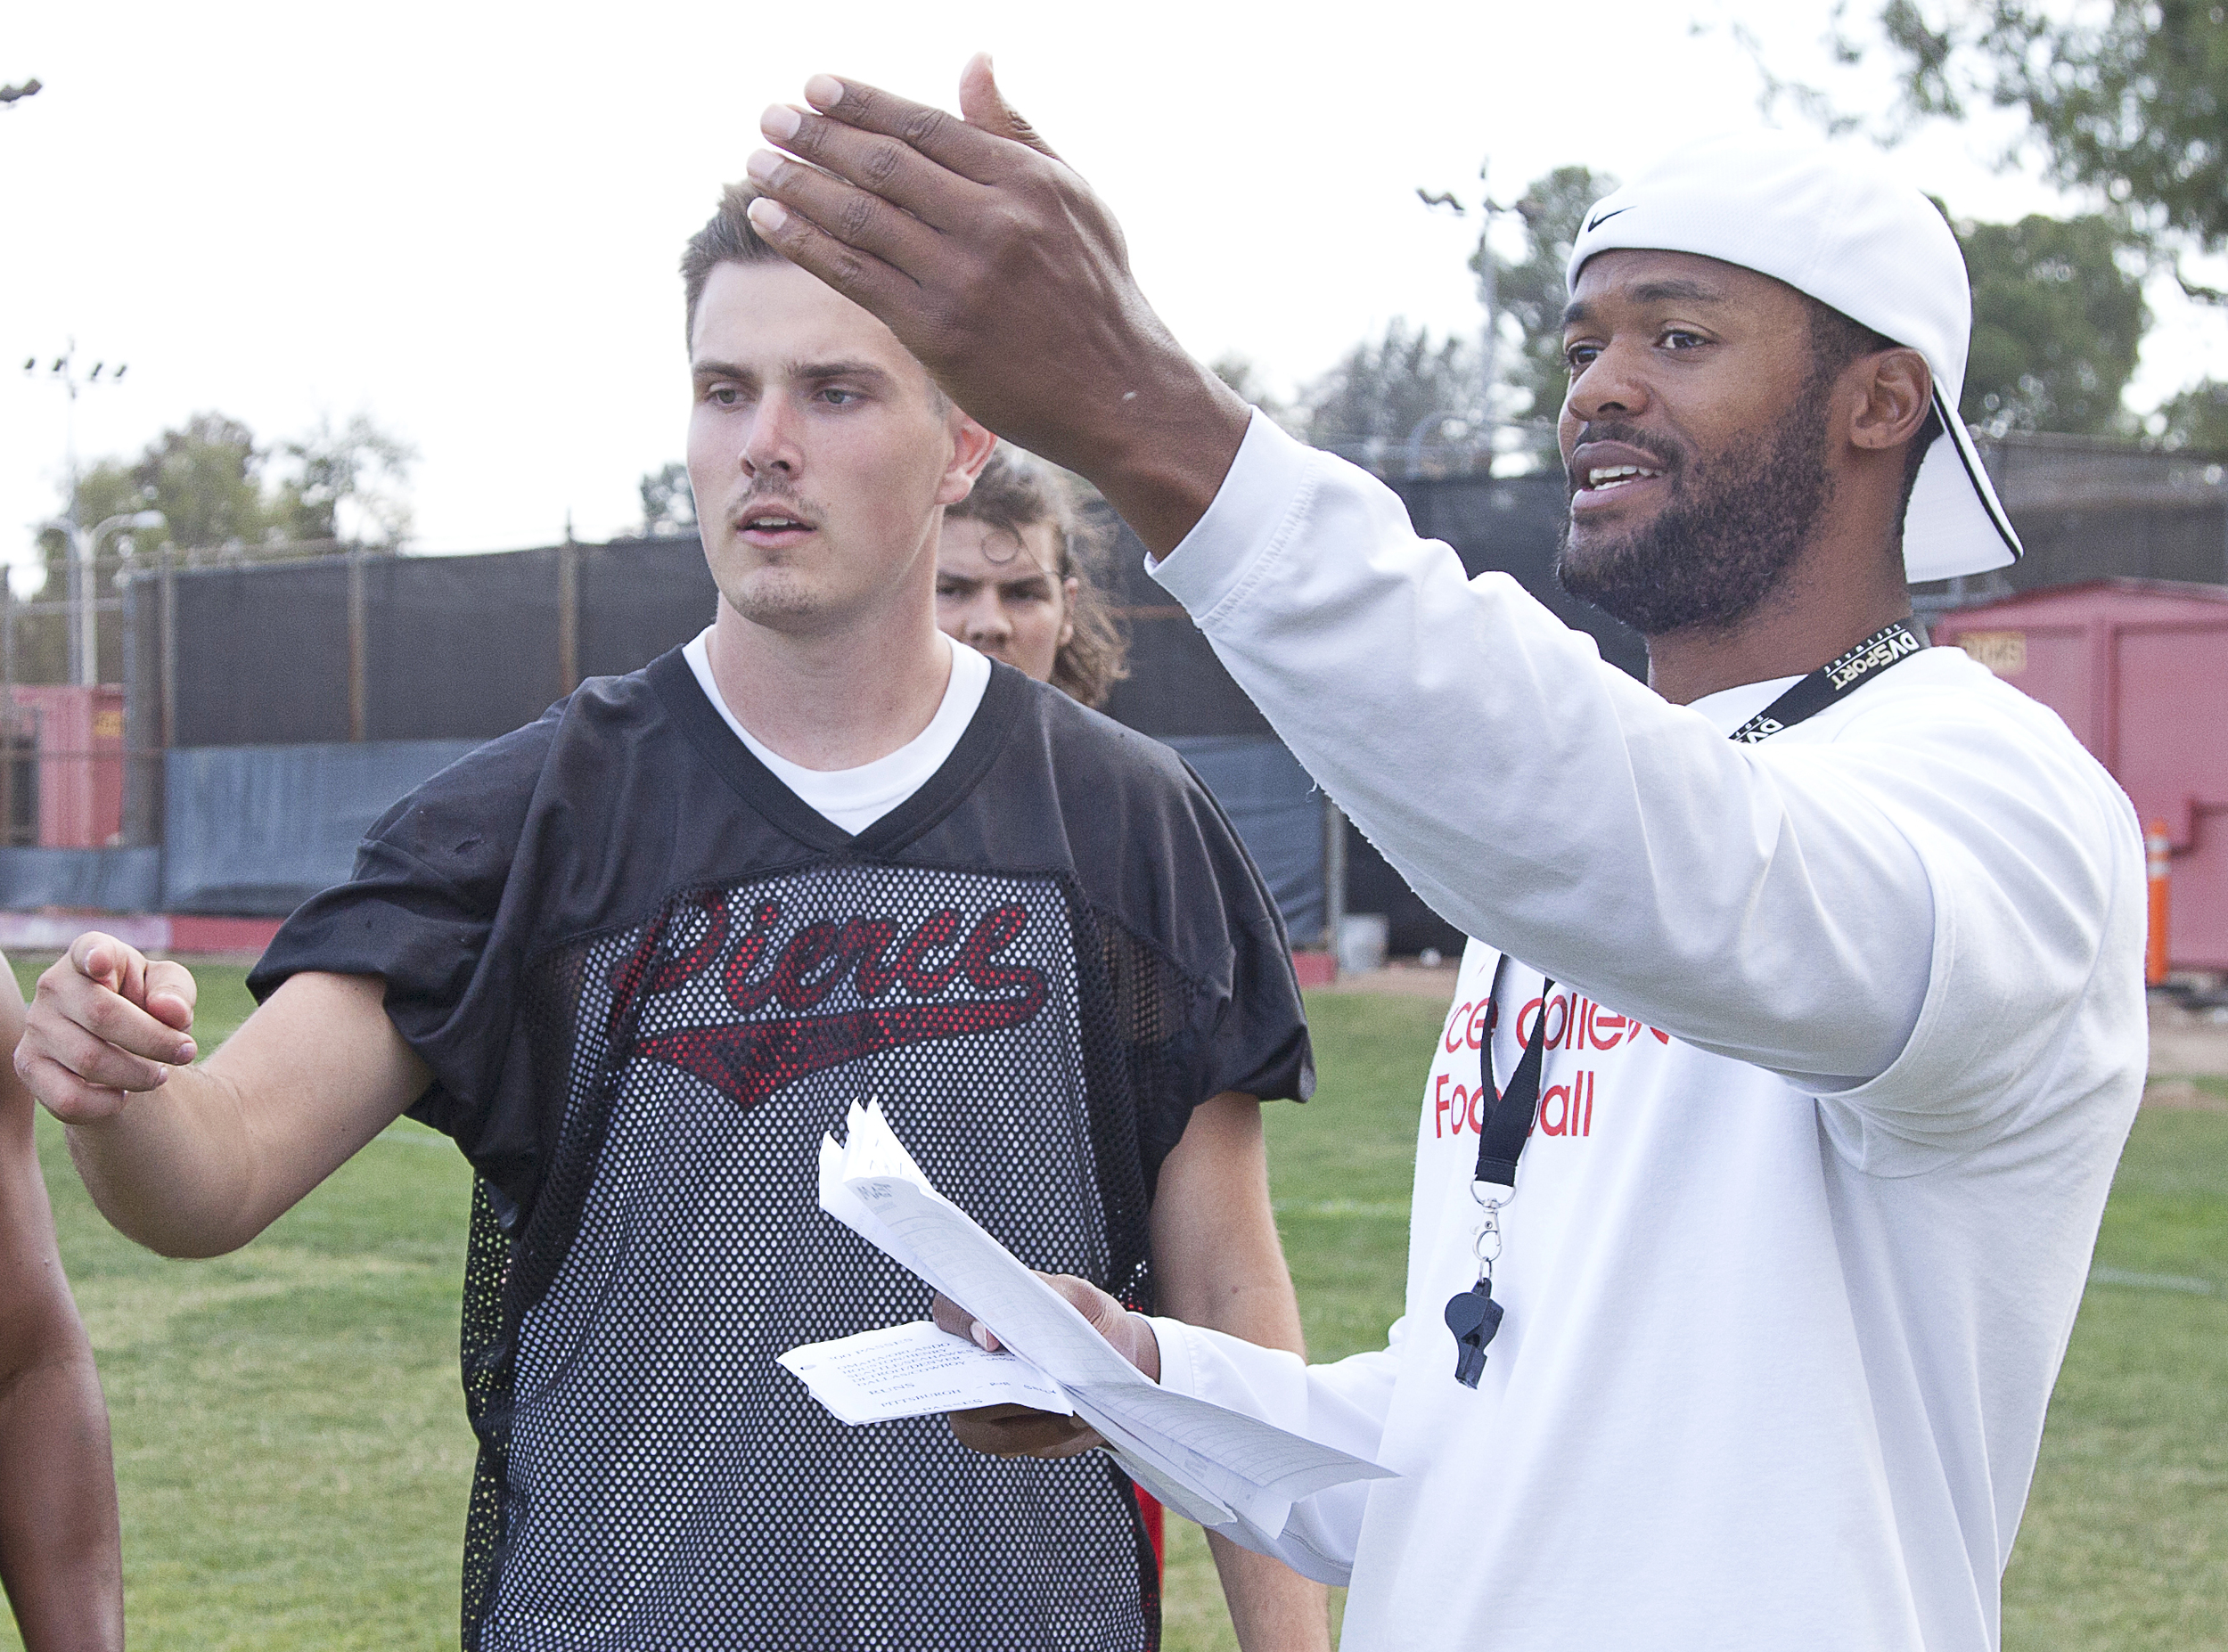  Sean Smith, quarterback for the Pierce football team, discusses a play with offensive co-ordinator Matthew Hatchette during spring practice on Thursday, May 21. Woodland Hills, Calif.&nbsp; 